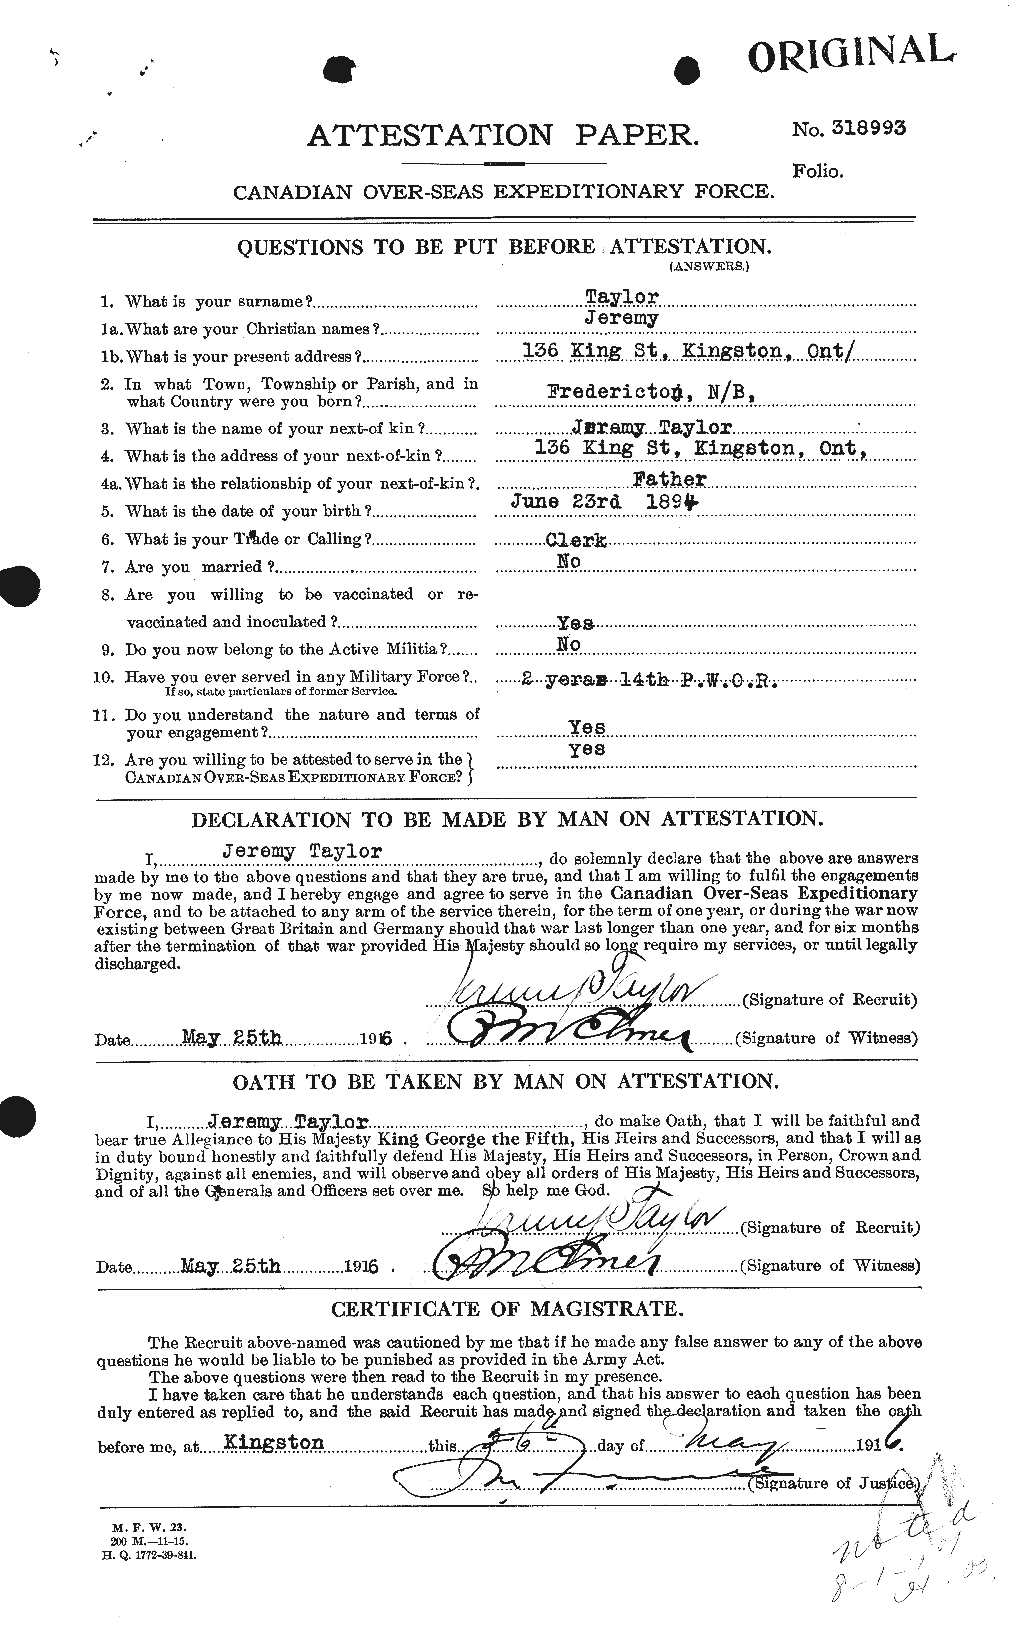 Personnel Records of the First World War - CEF 626969a